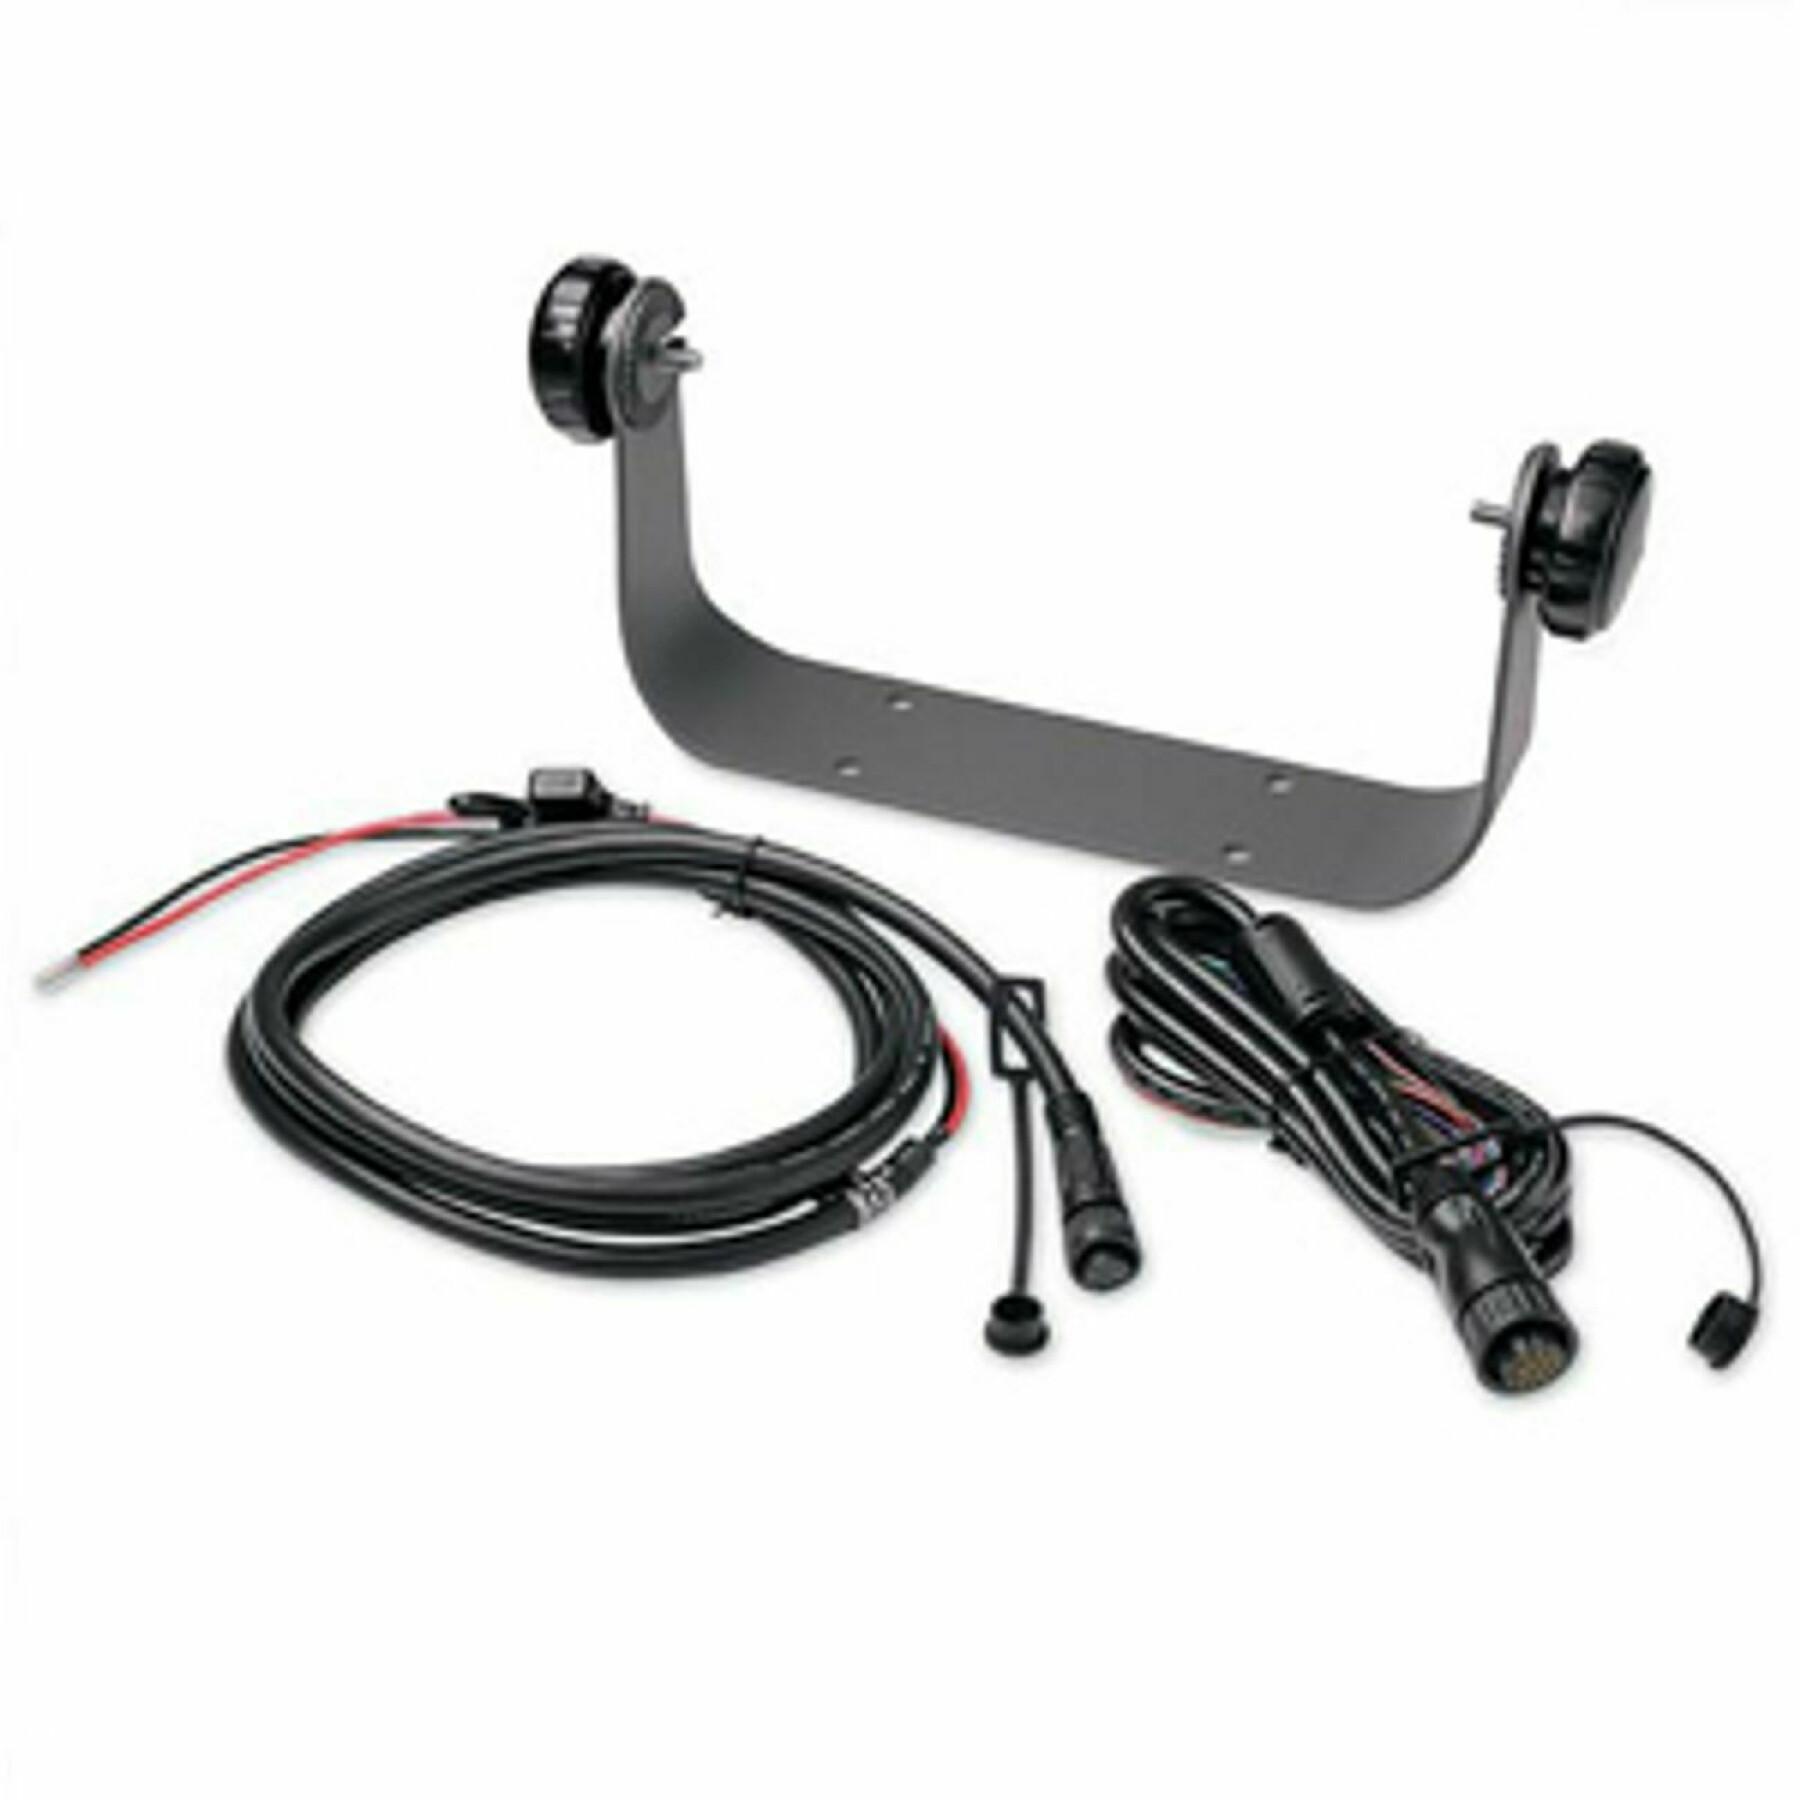 Supporto Garmin second mounting station